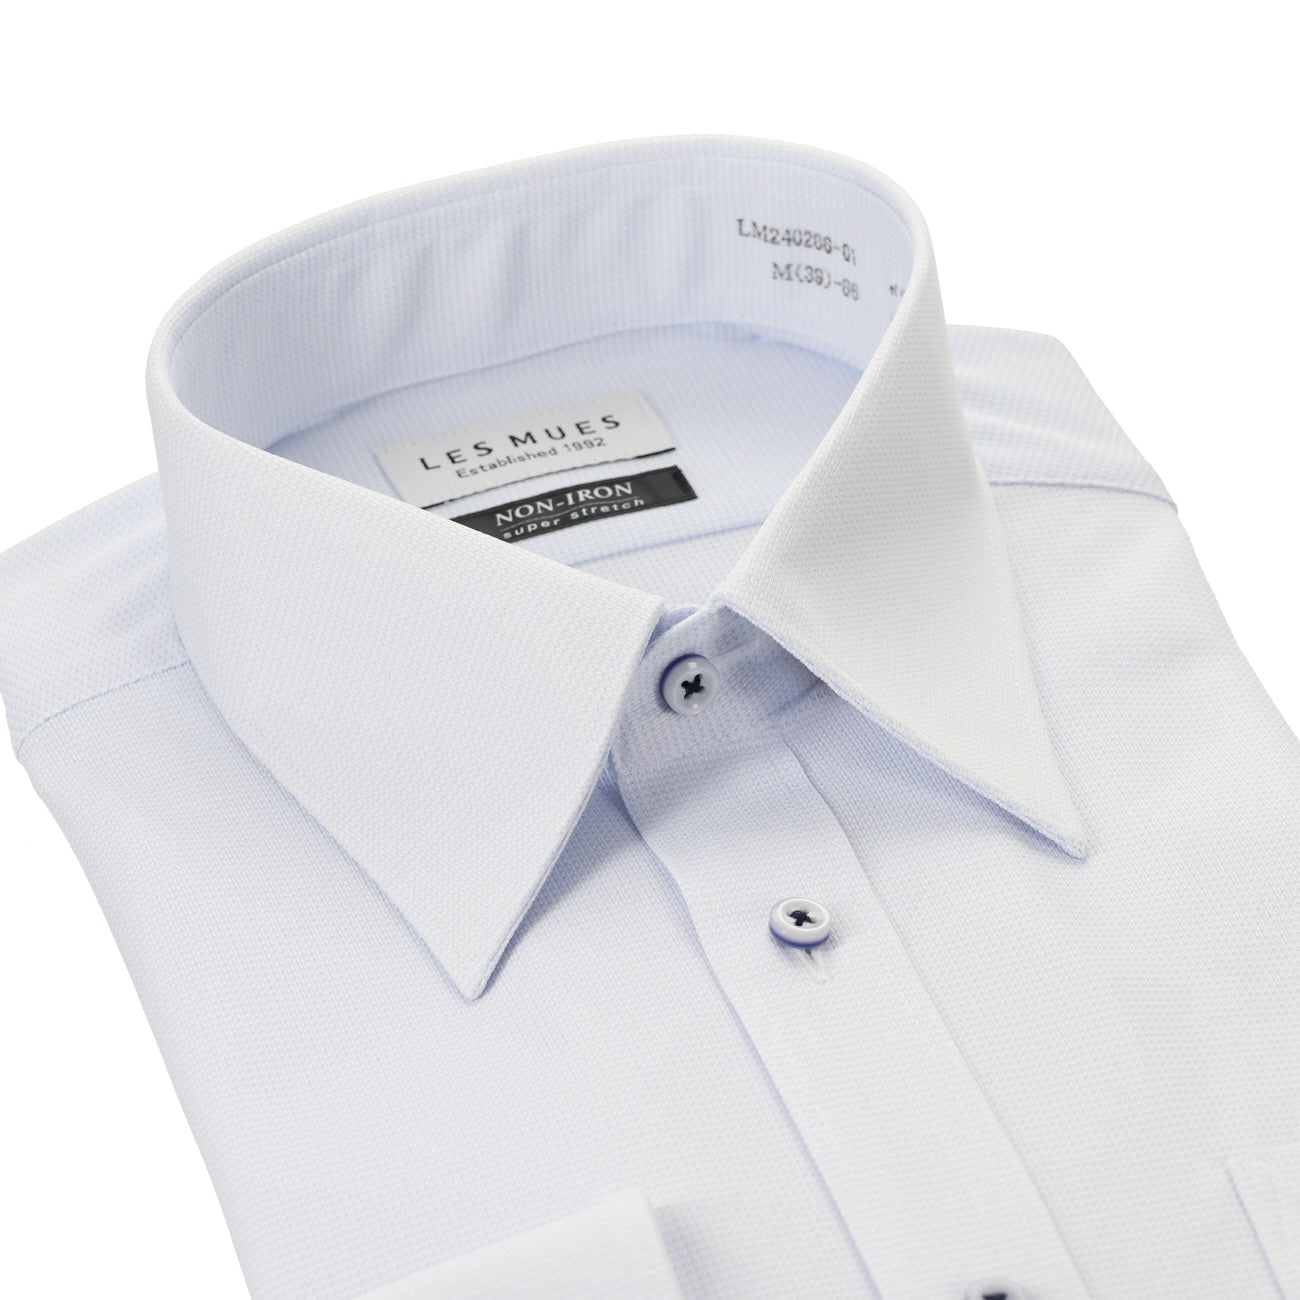 LES MUES Non-iron Super Stretch Blue Regular Collar Shirt - Regular fit [Recycled Material]